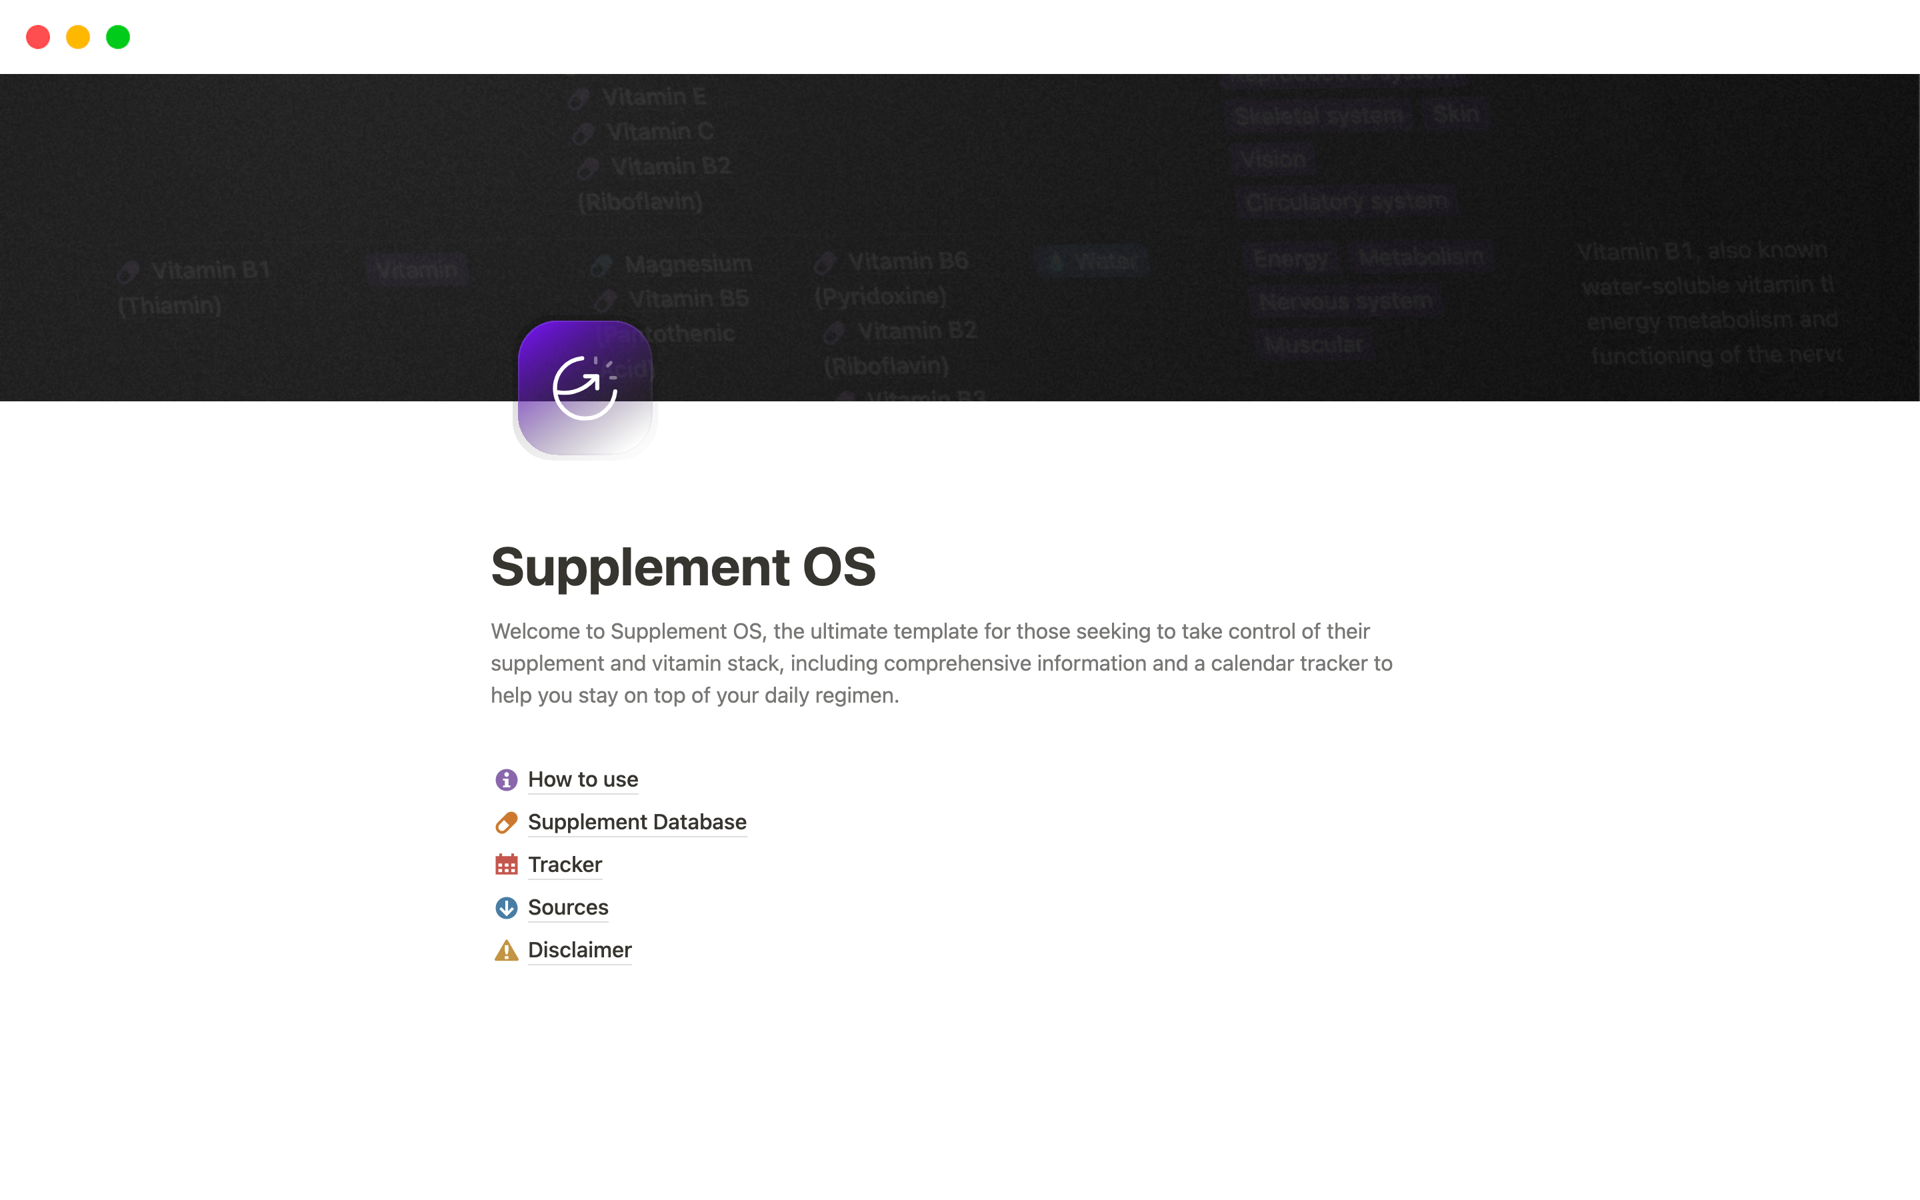 The ultimate template for those seeking to take control of their supplement and vitamin stack, including comprehensive information and a calendar tracker to help you stay on top of your daily regimen.